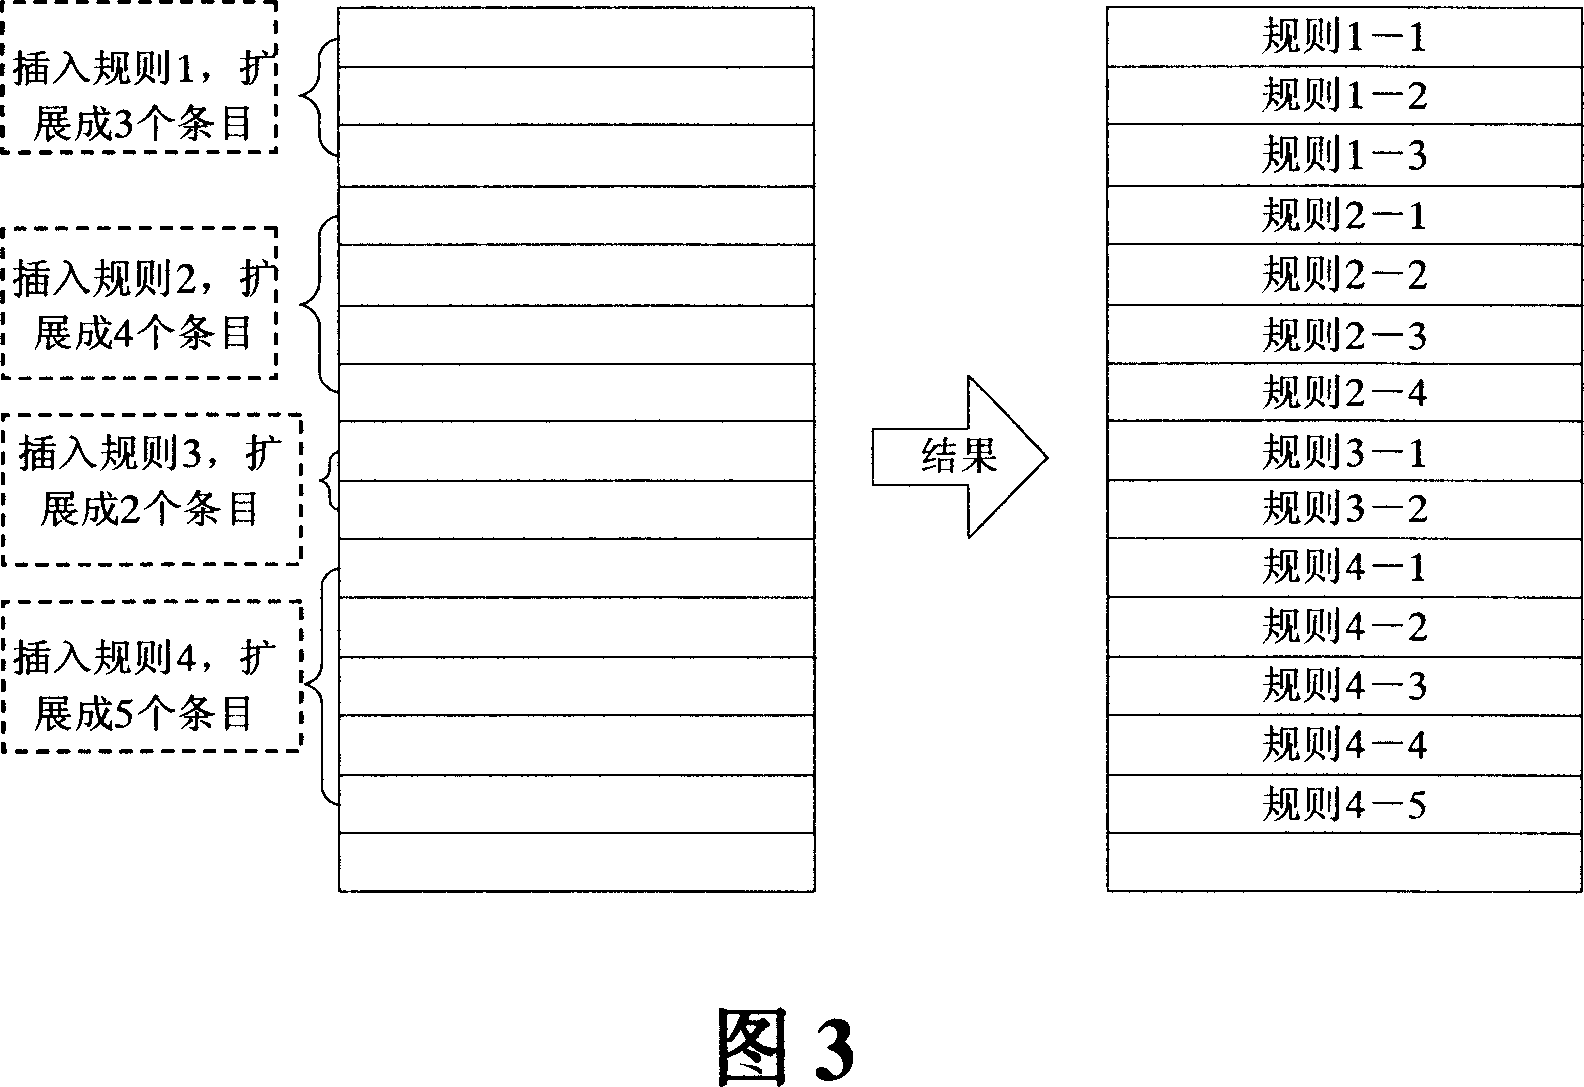 Rule update method for three-folded content addressable memory message classification